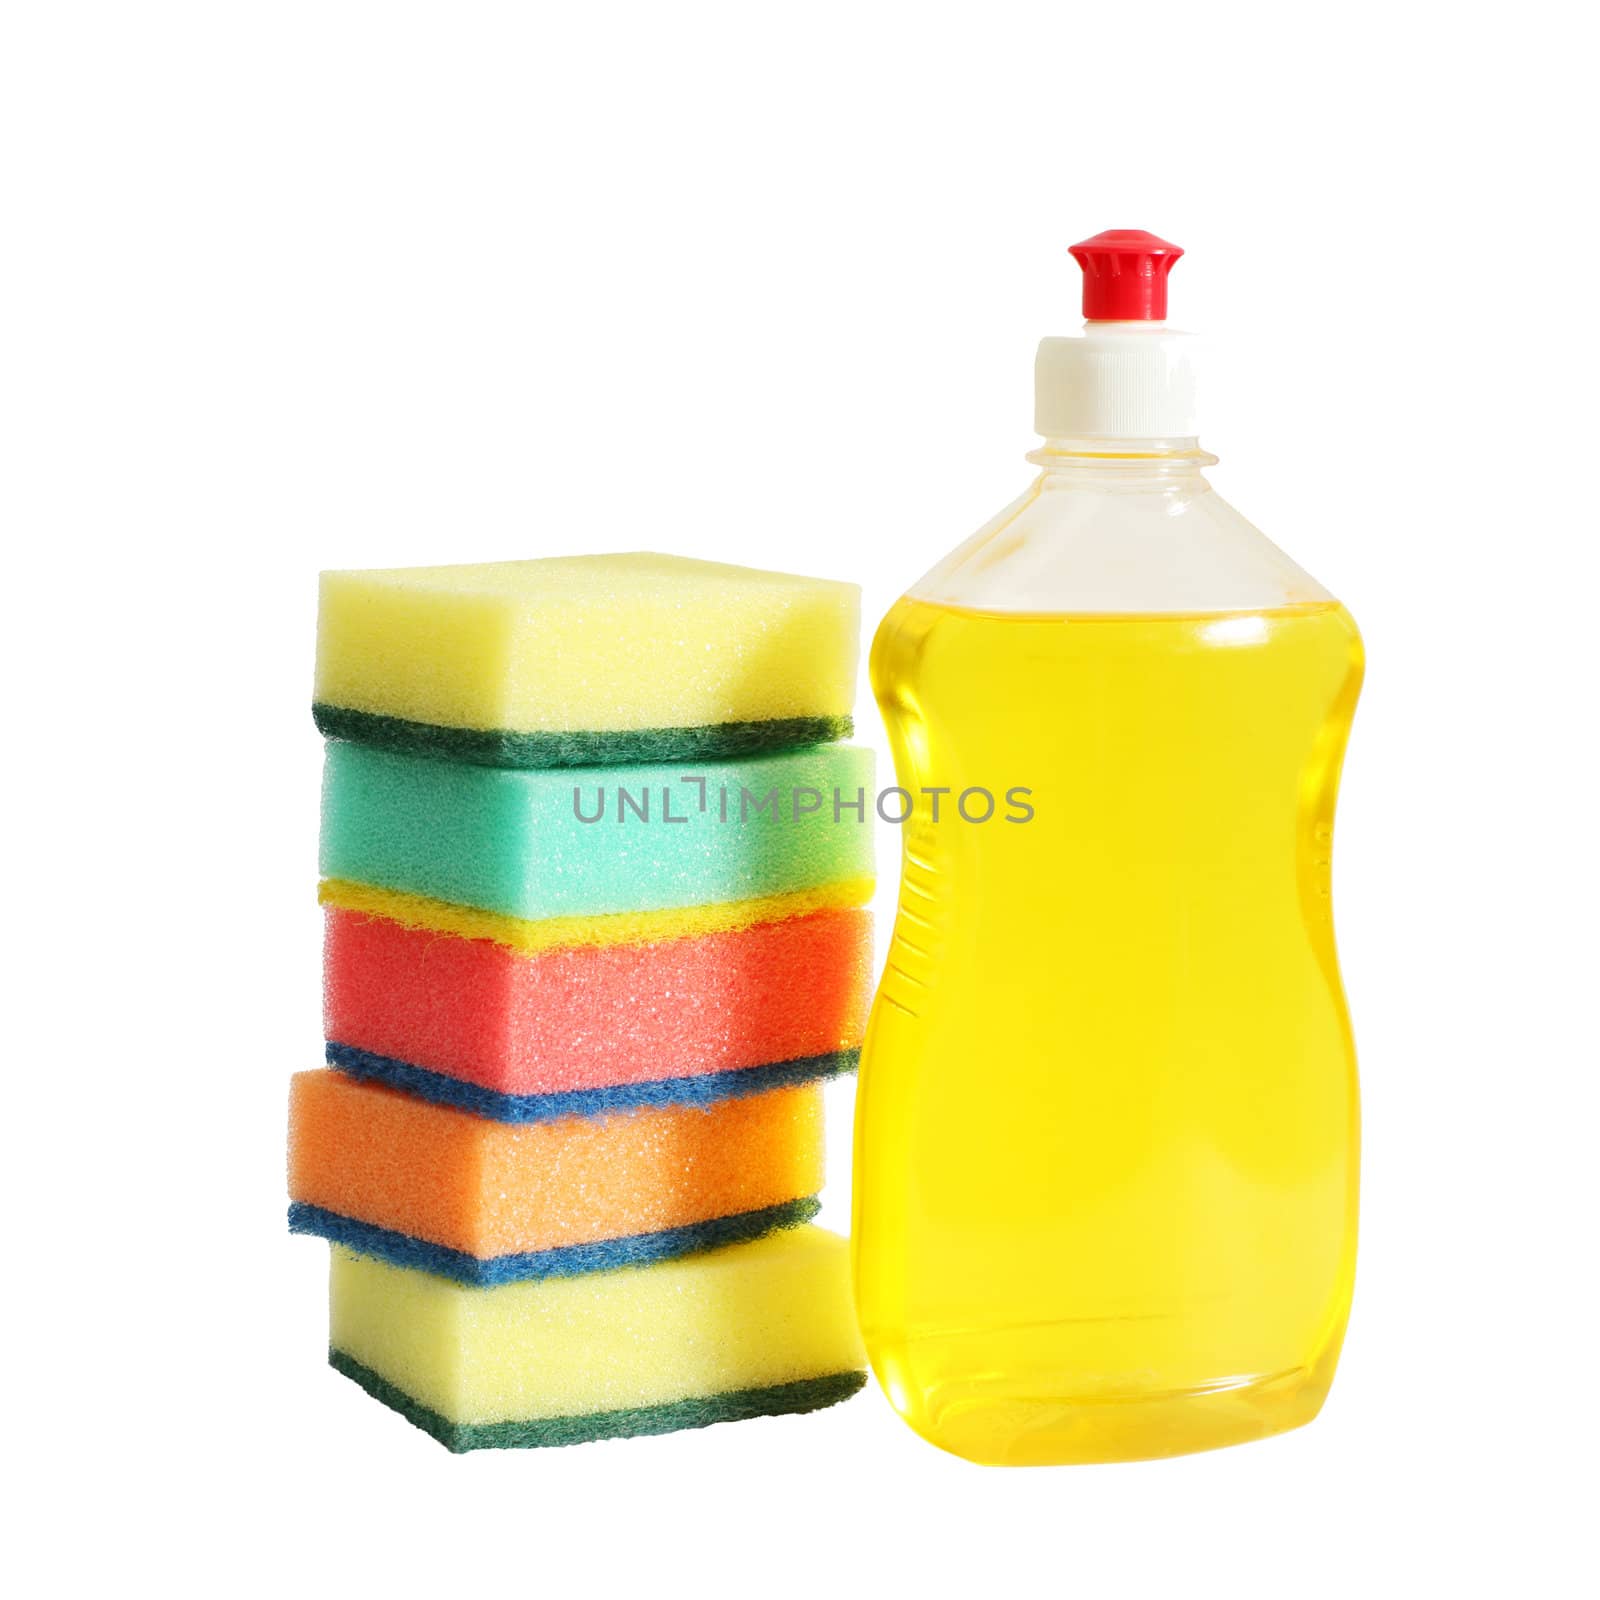 An image of sponges with yellow bottles